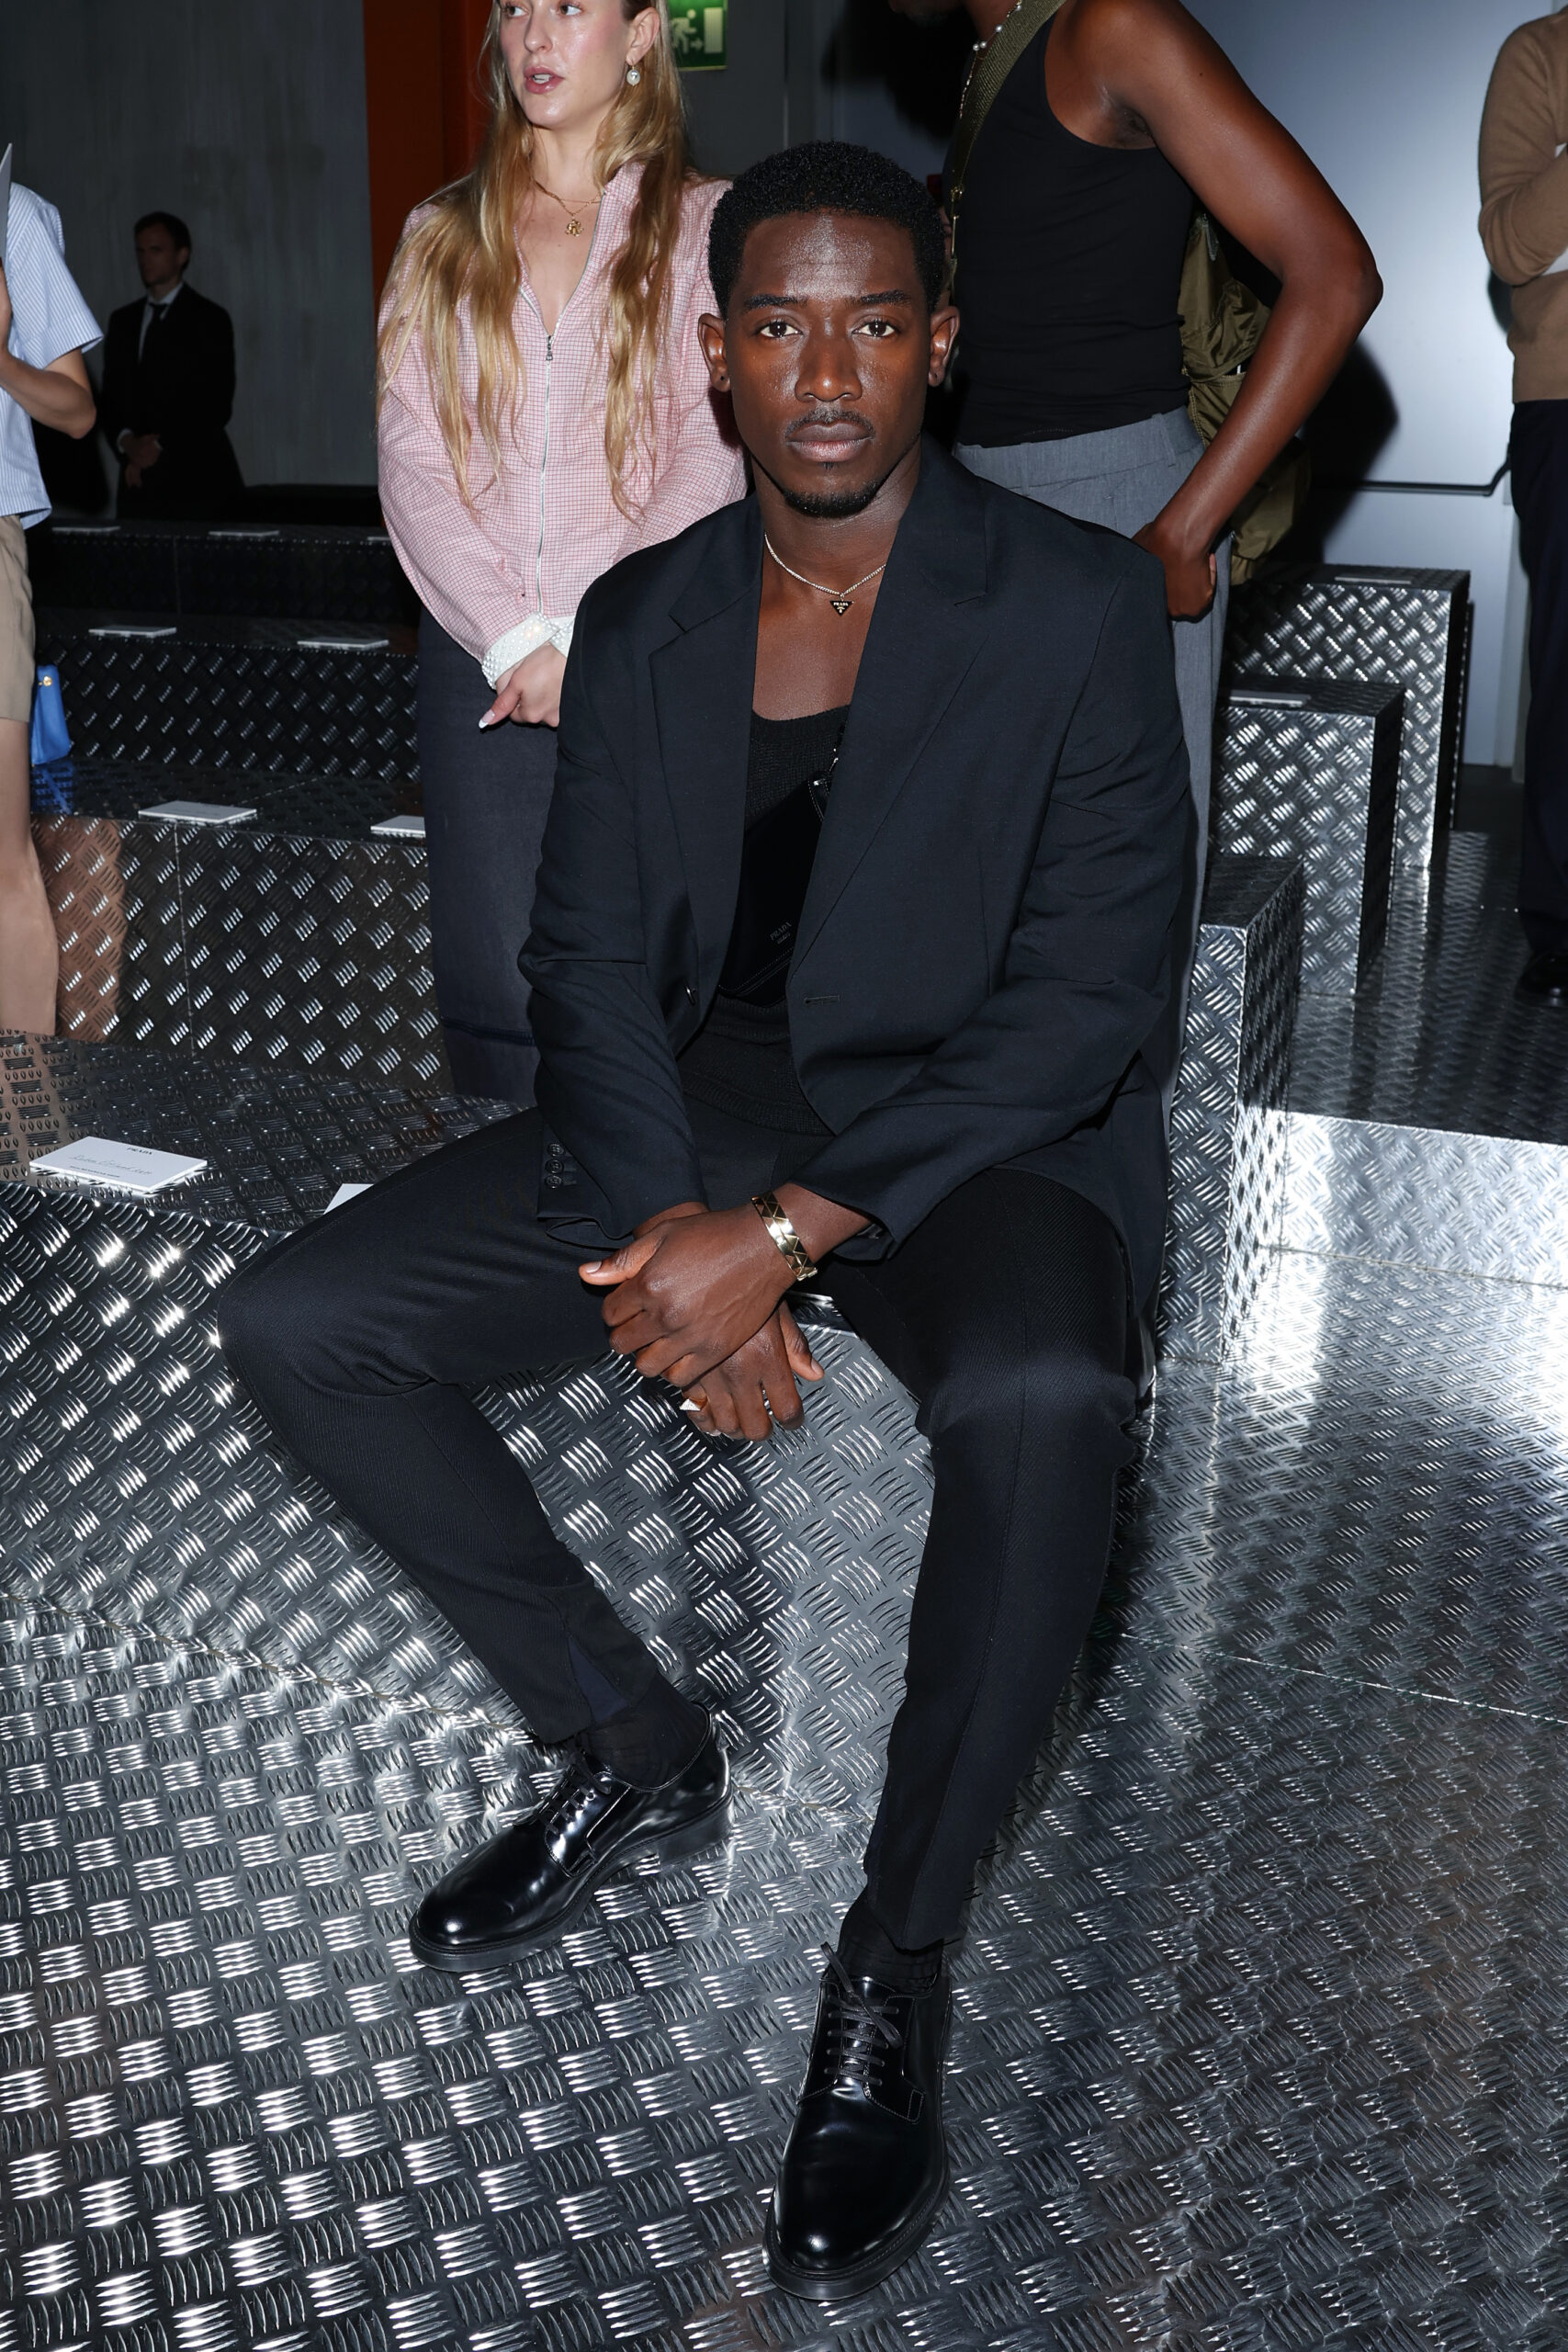 MILAN, ITALY - JUNE 18: Damson Idris attends the Prada Spring/Summer 2024 Menswear Fashion Show during the Milan Men's Fashion Week F/W 2023 - 2024 at Fondazione Prada on June 18, 2023 in Milan, Italy. (Photo by Jacopo M. Raule/Getty Images for Prada)